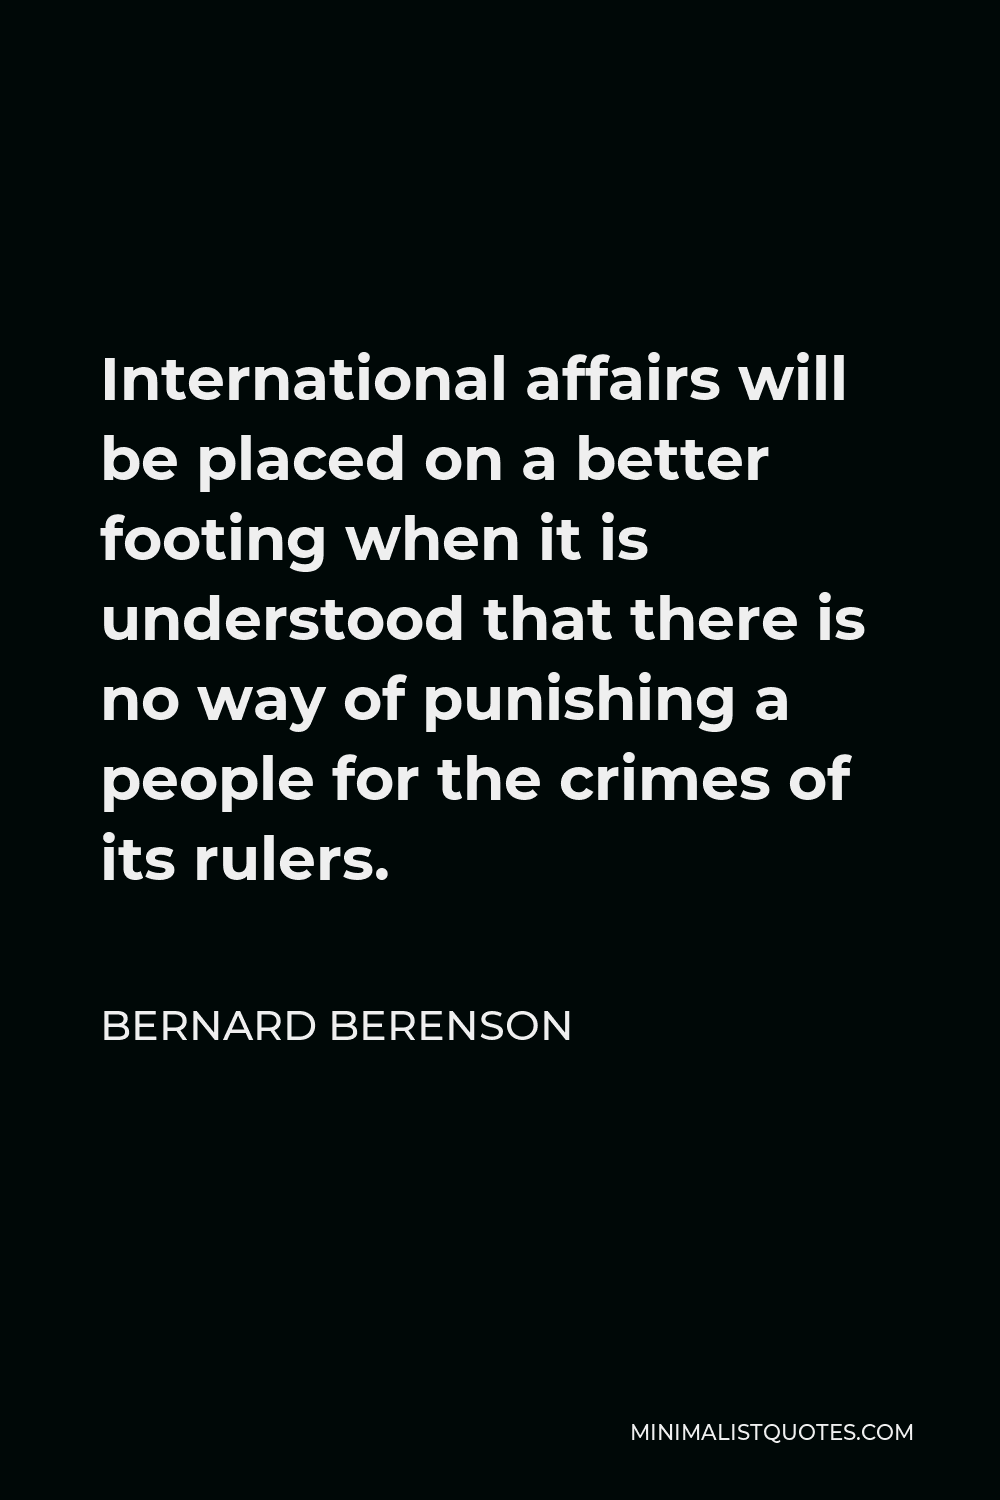 Bernard Berenson Quote - International affairs will be placed on a better footing when it is understood that there is no way of punishing a people for the crimes of its rulers.